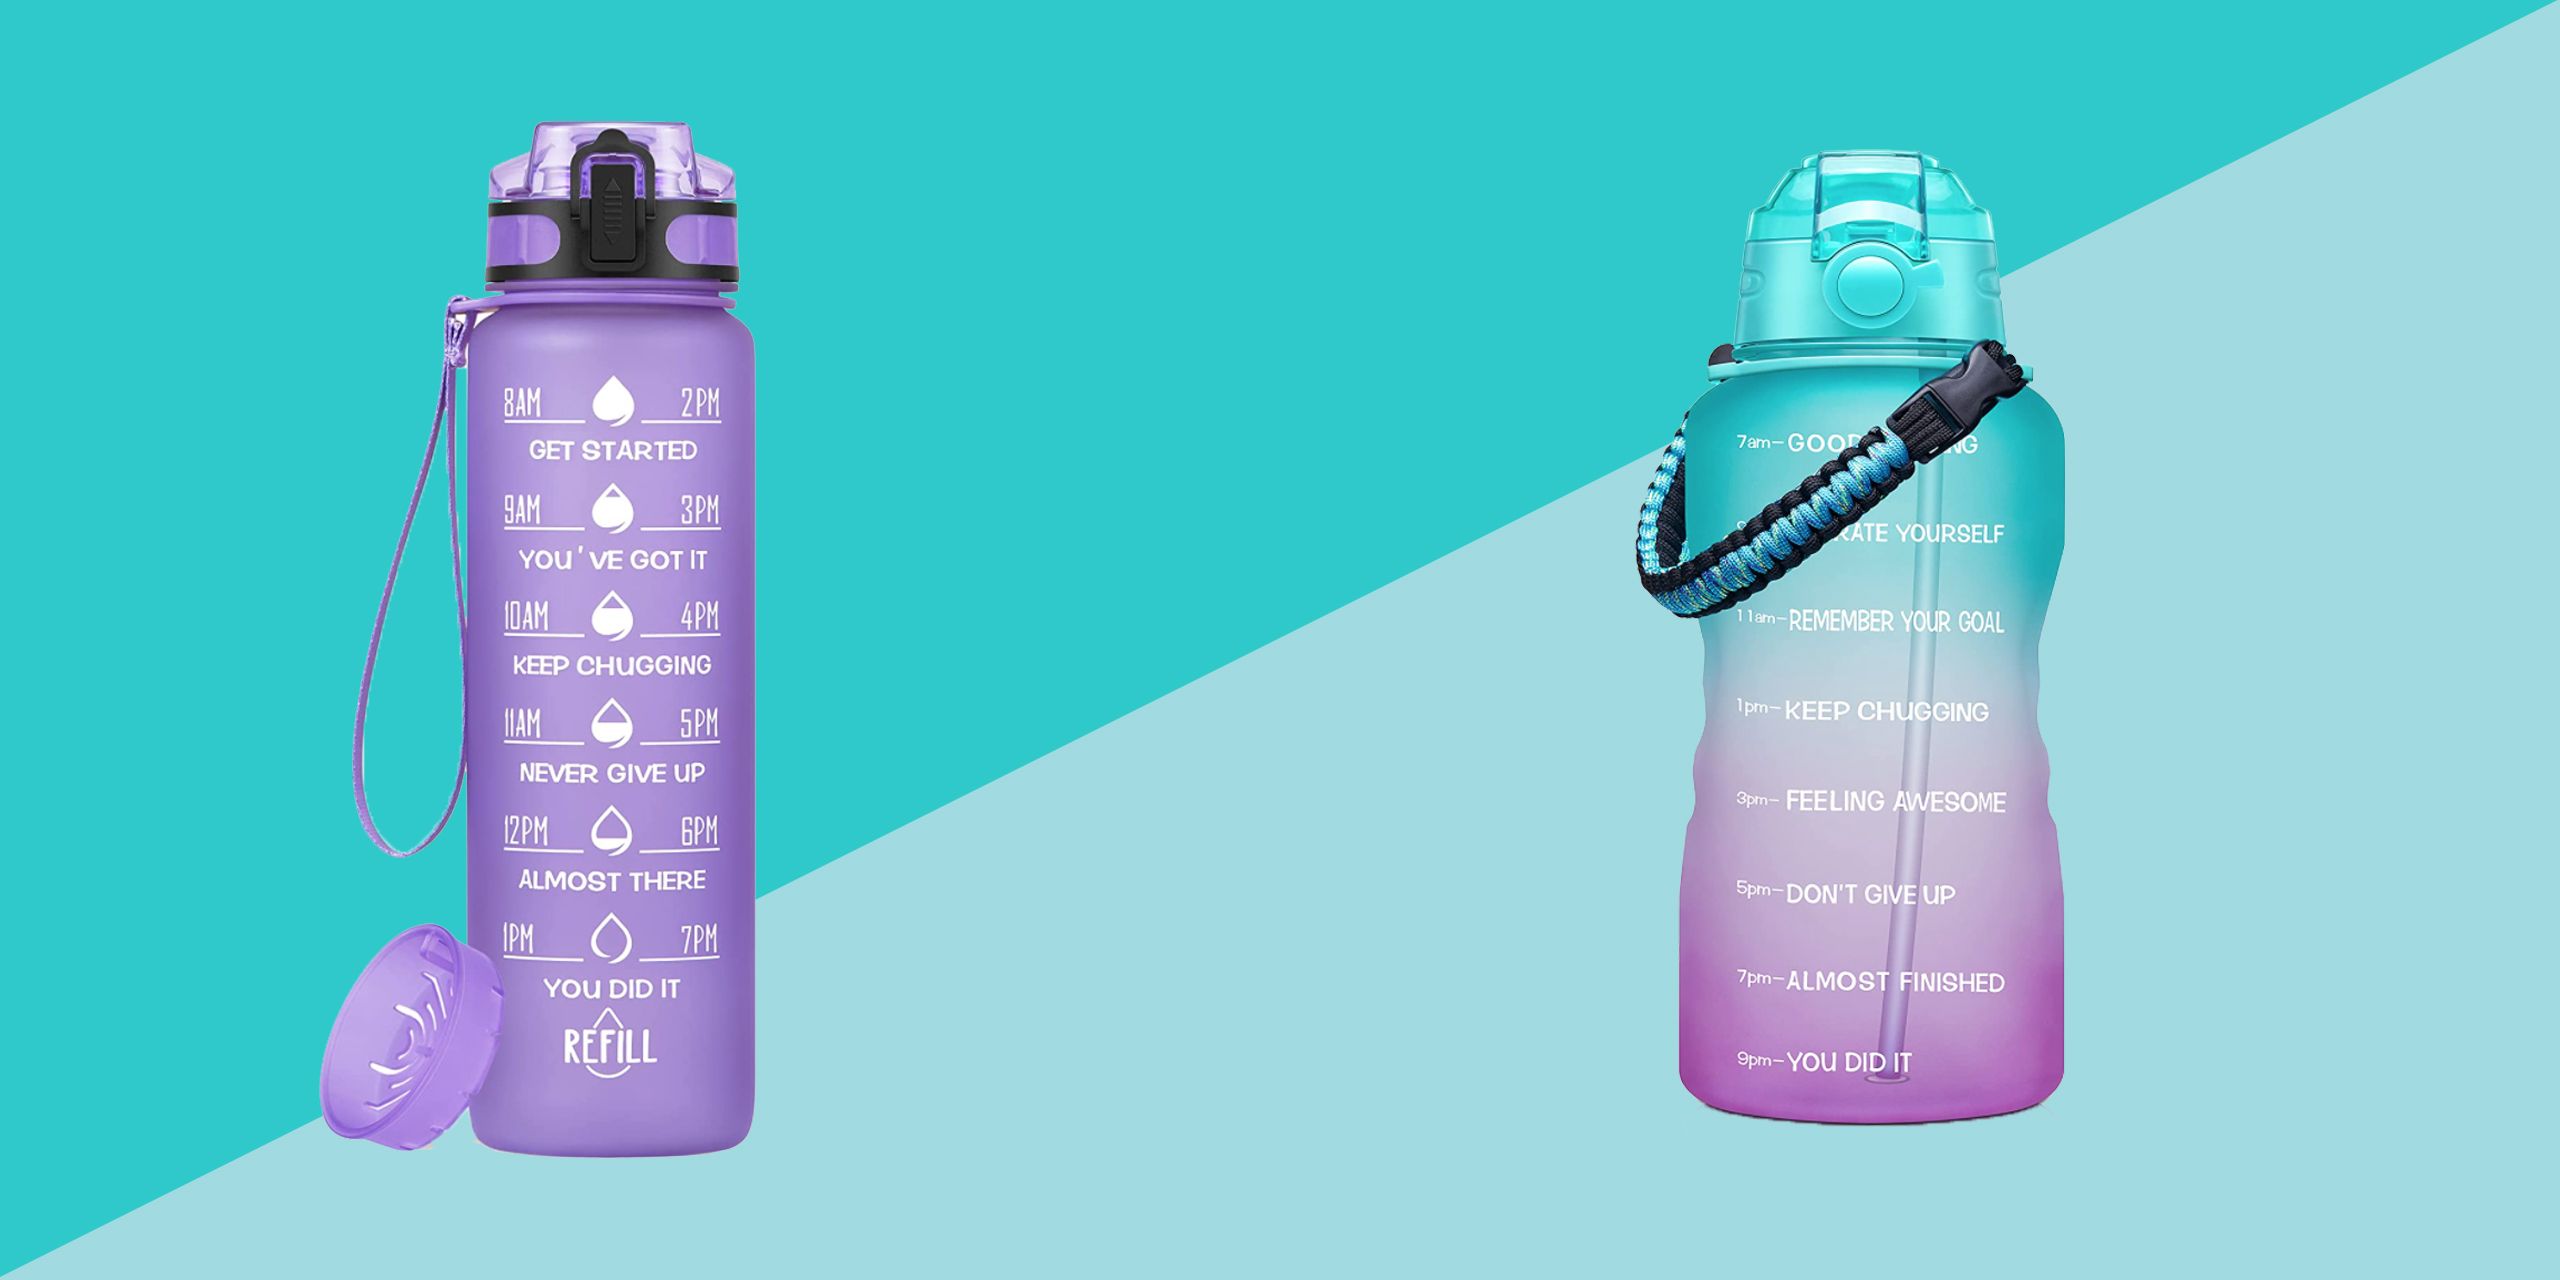 The 7 Best Water Bottles for Kids